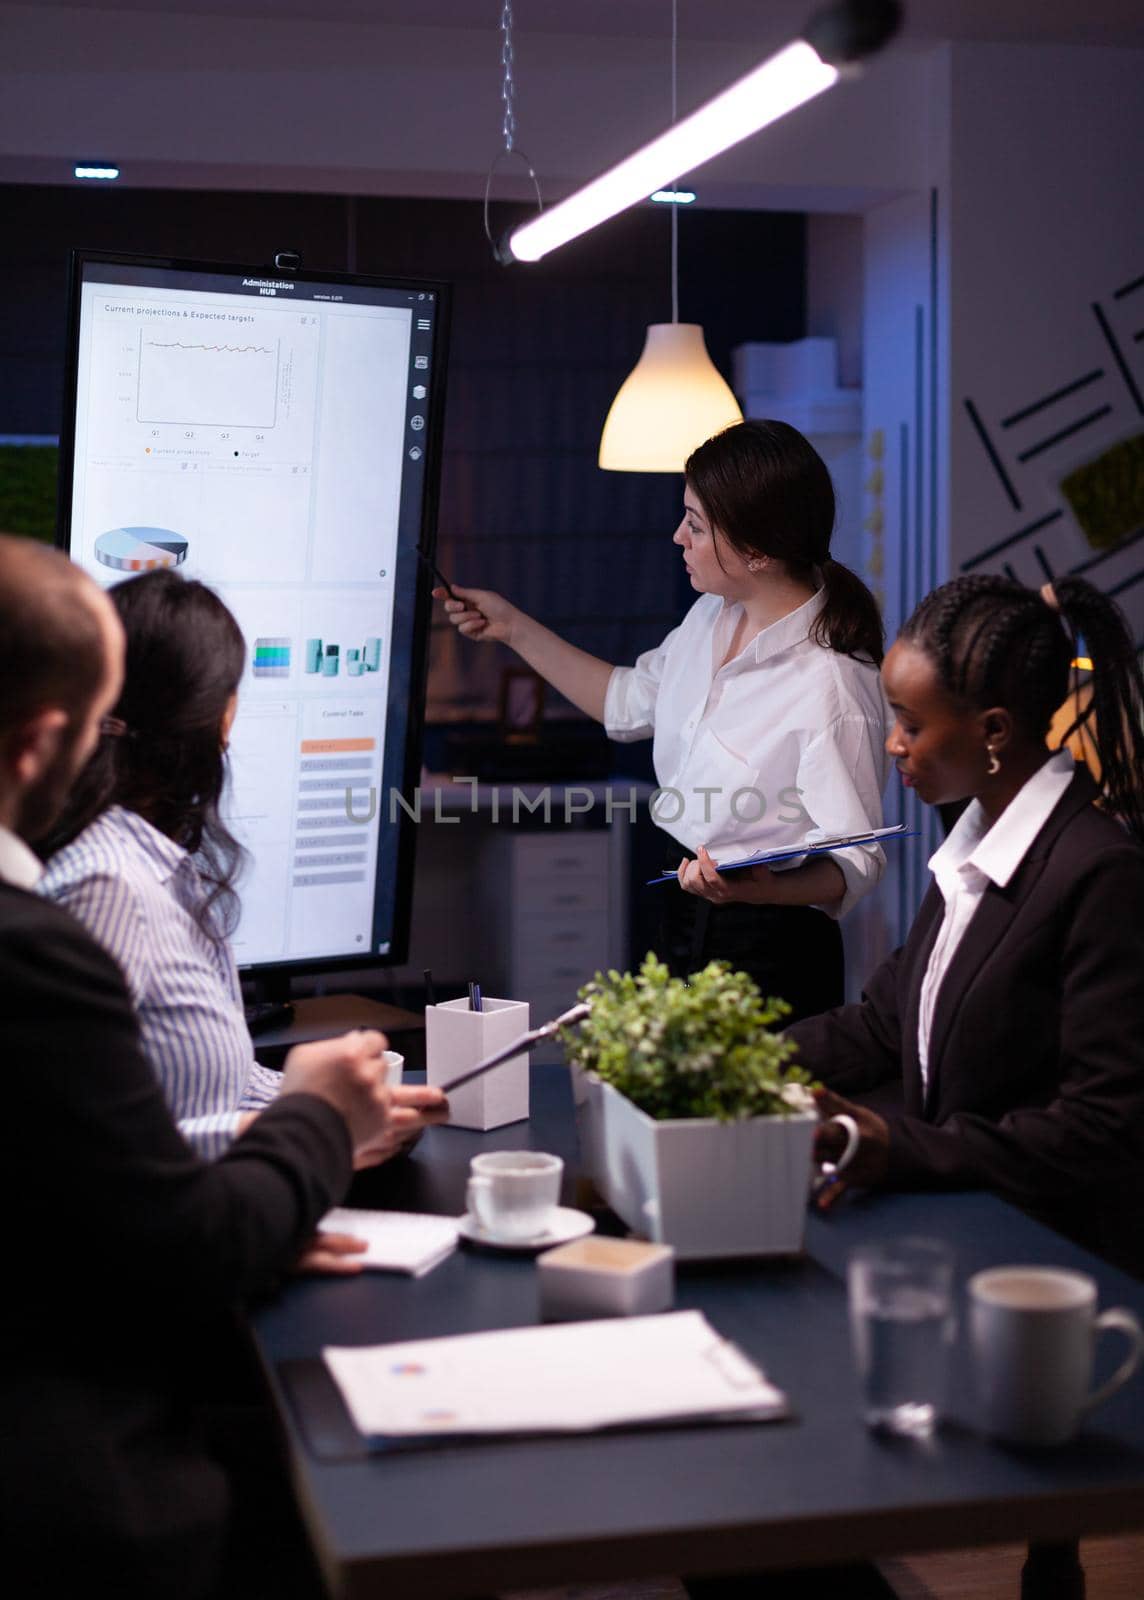 Executive manager woman explaining management statistics working at company strategy overtime in office meeting room. Diverse multi-ethnic businesspeople teamwork brainstorming ideas in evening.